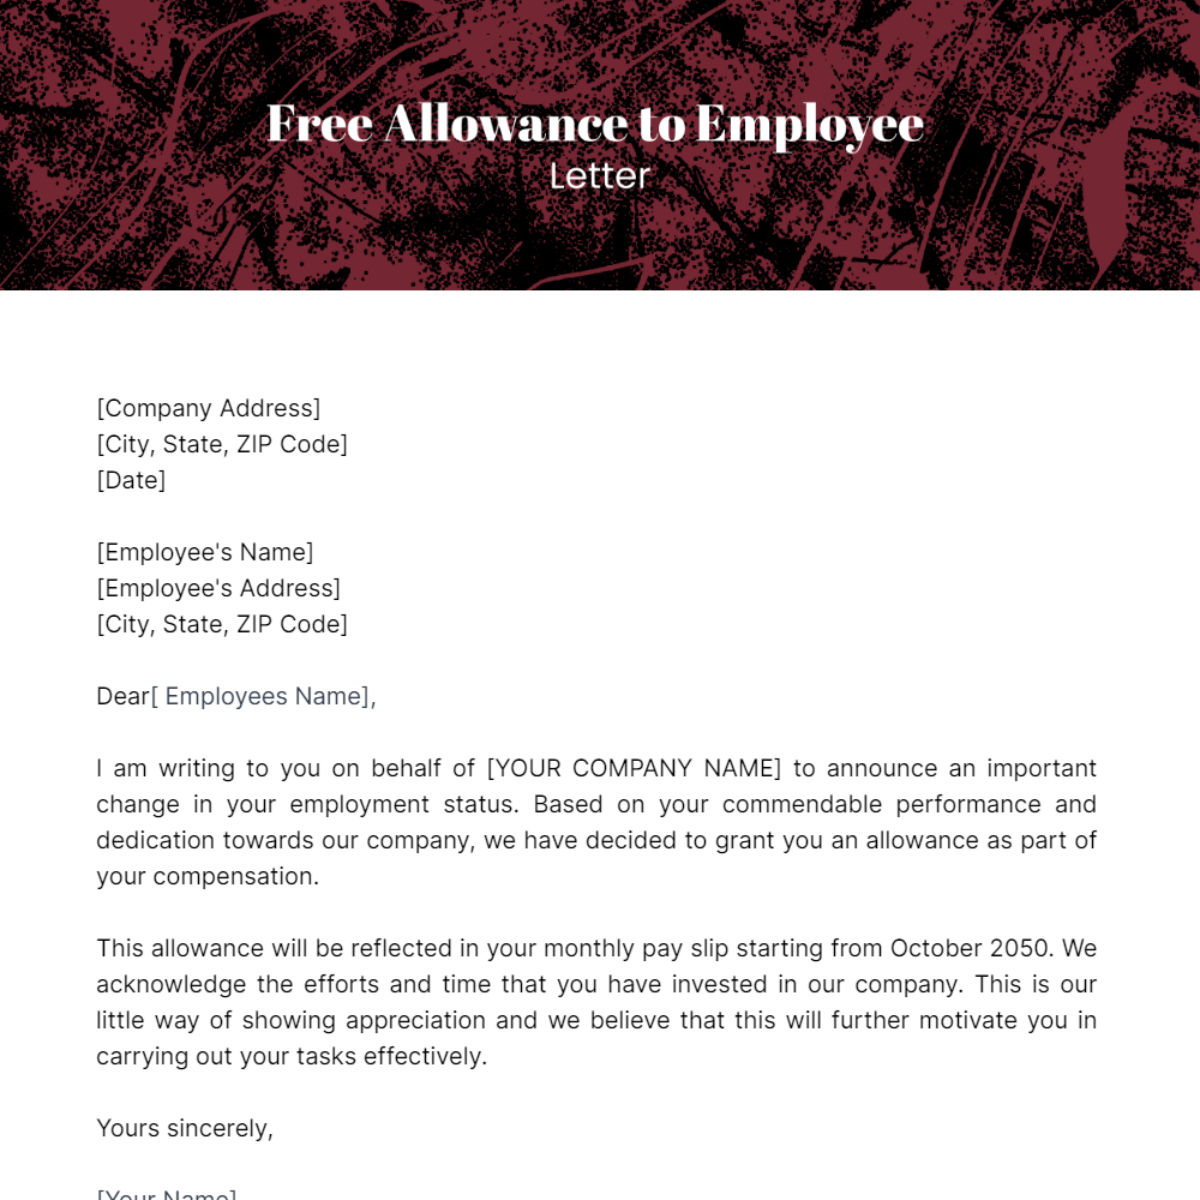 Allowance to Employee Letter Template